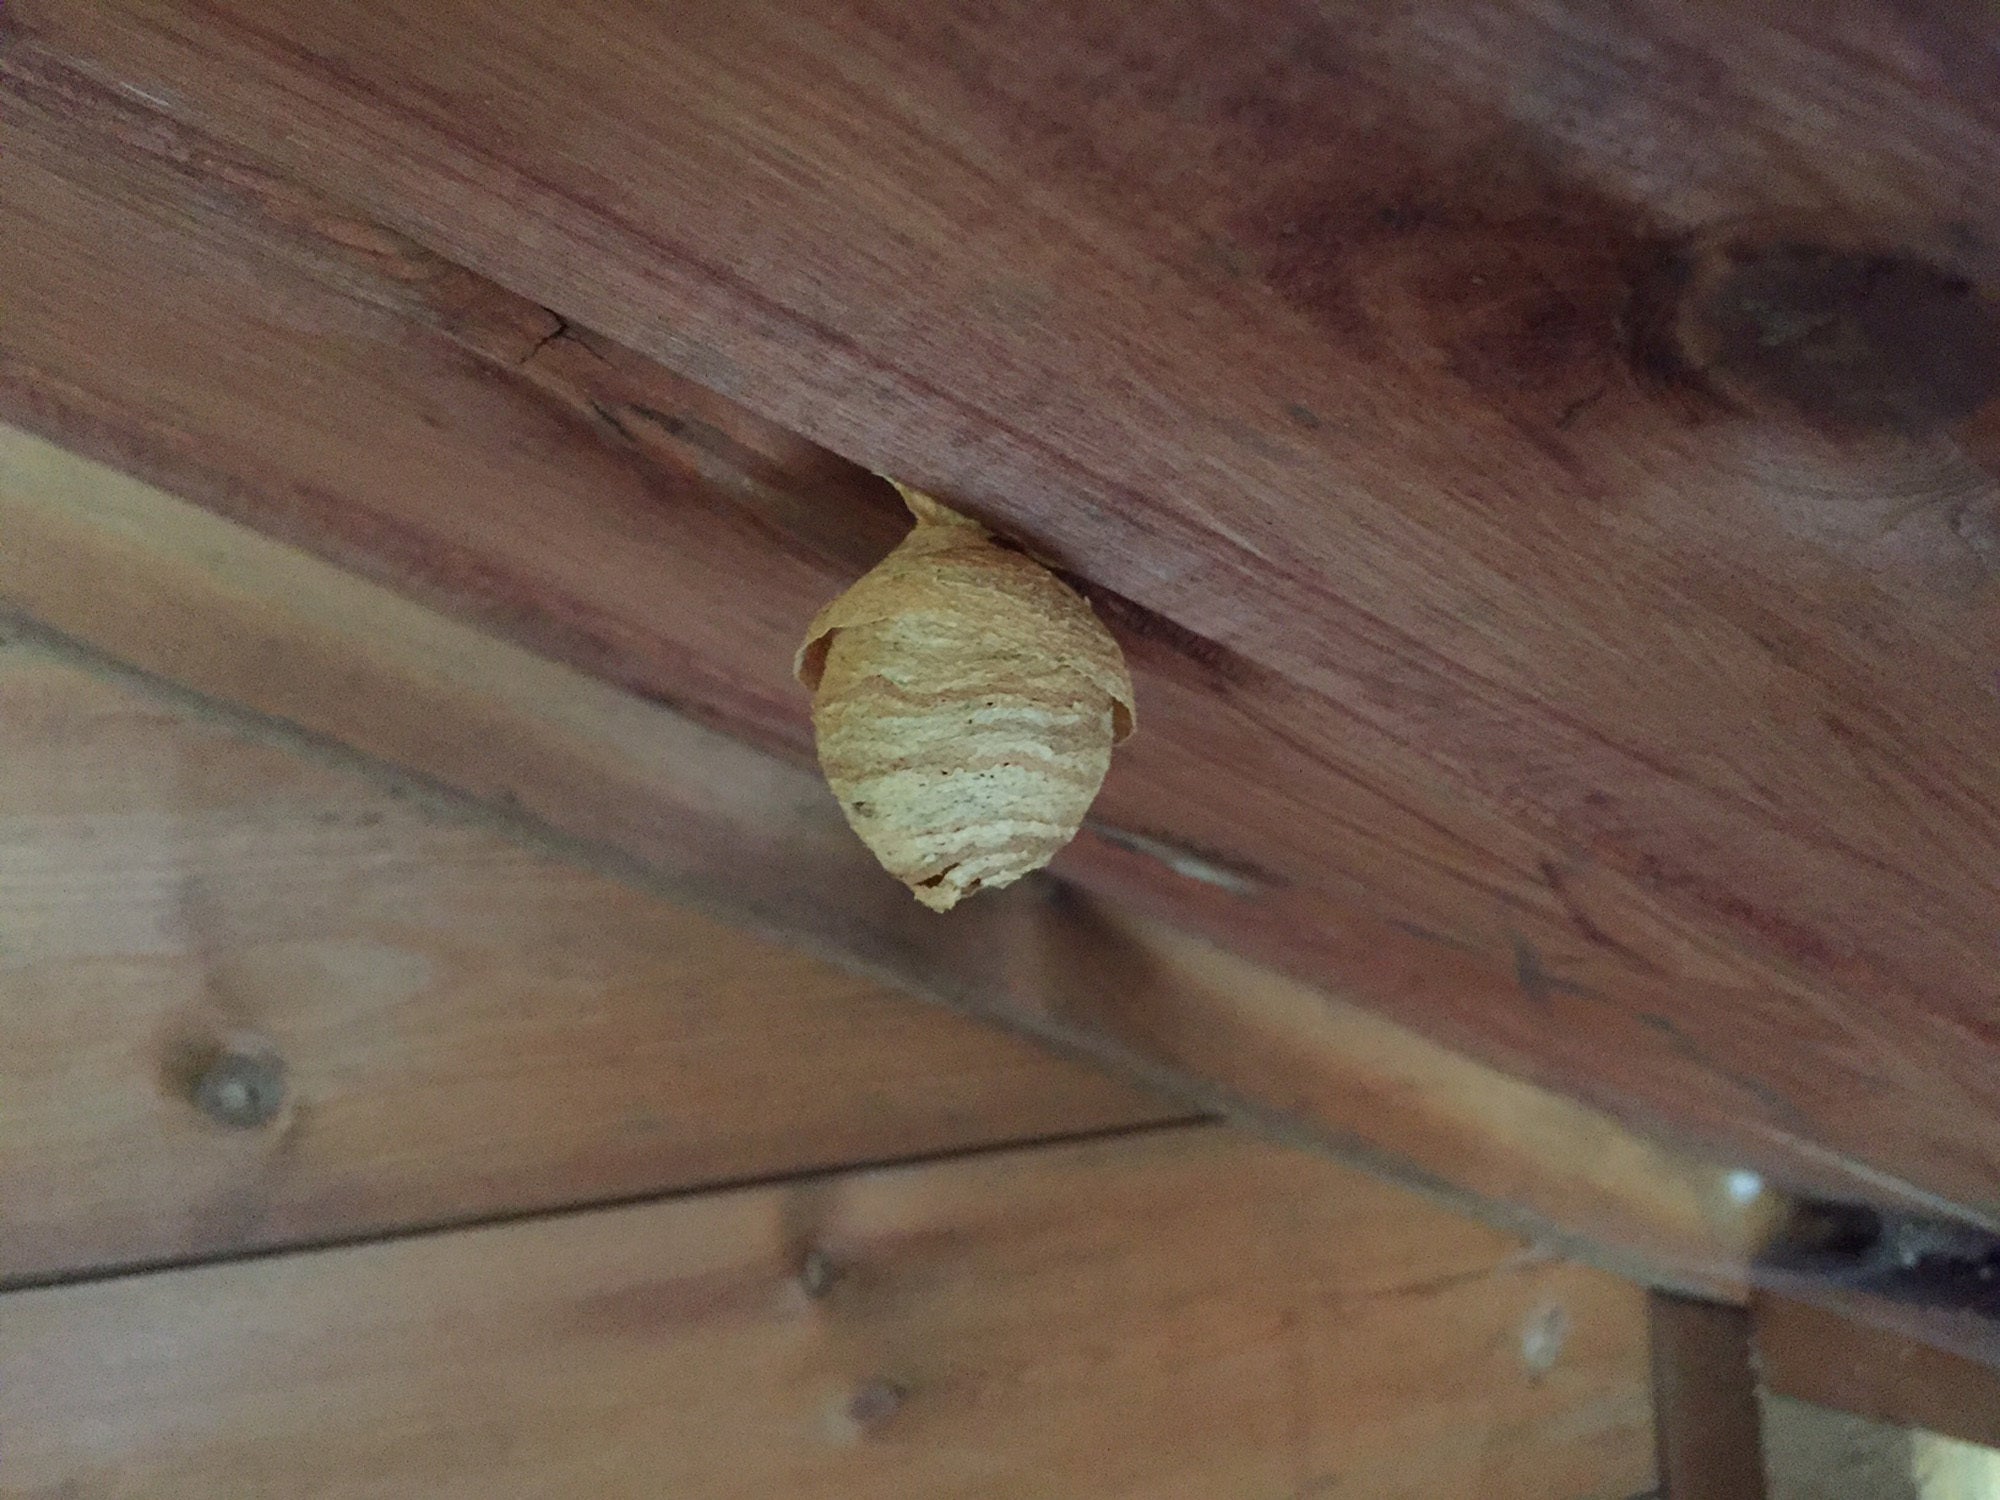 A wasps' nest in a garden shed